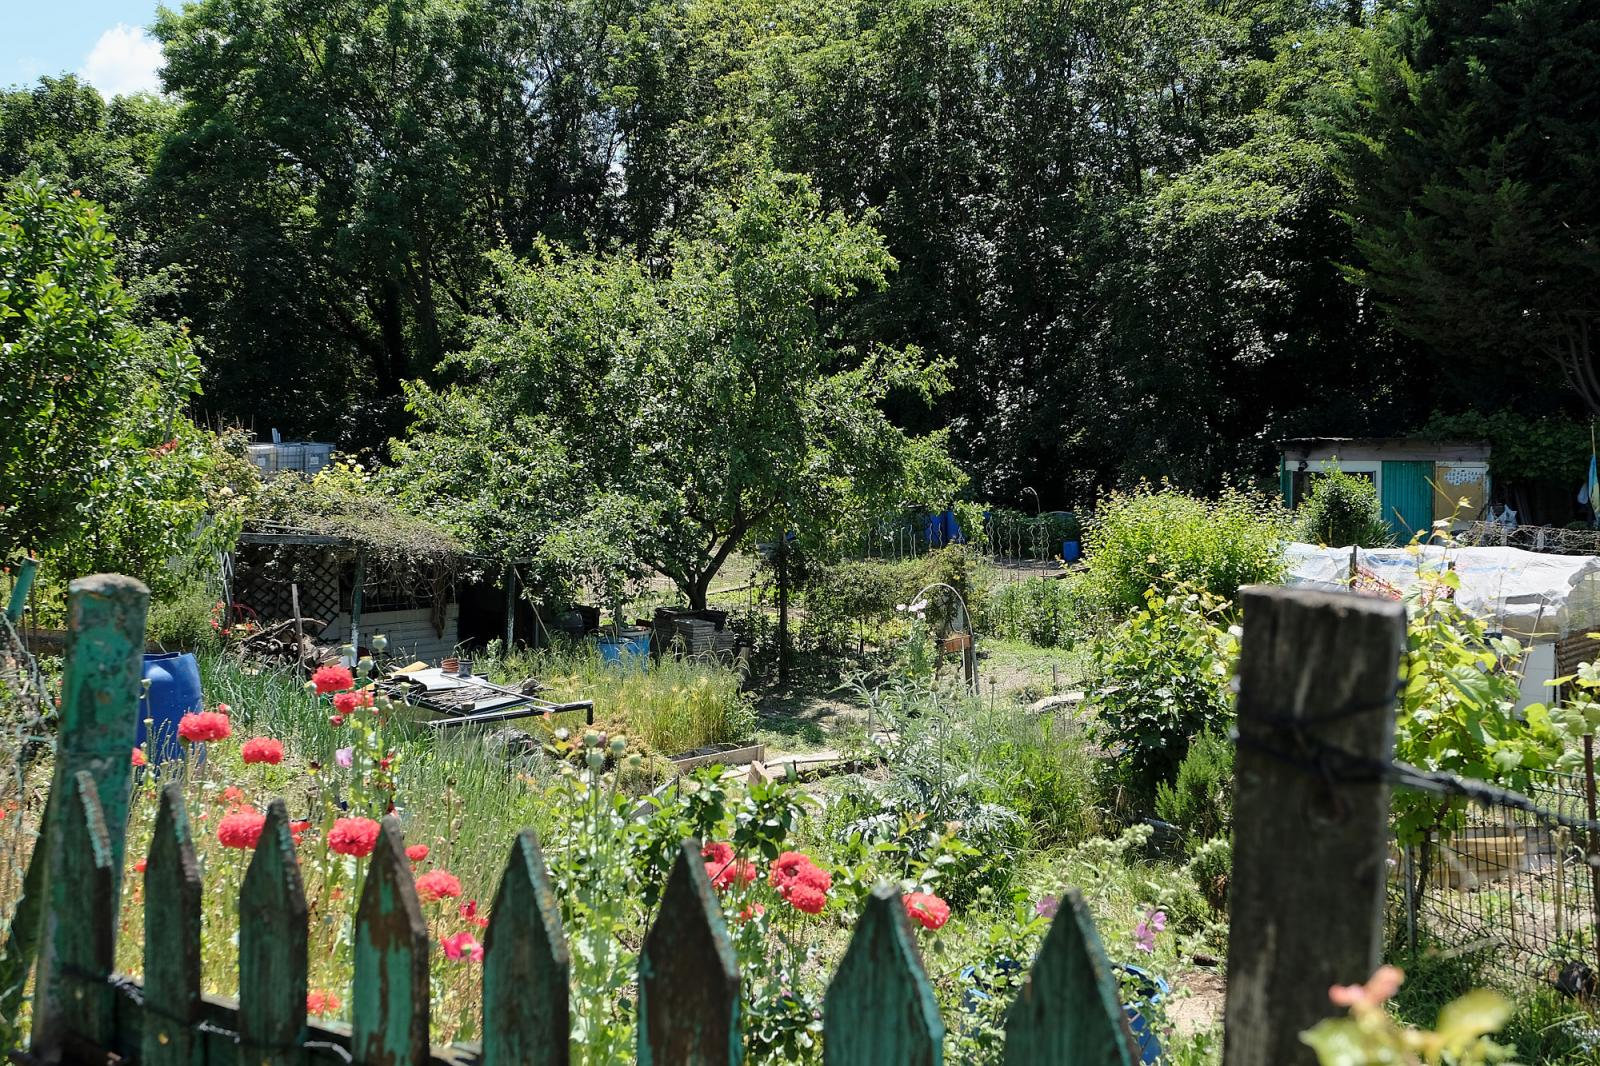 The allotments of Aubervilliers date back nearly a century.